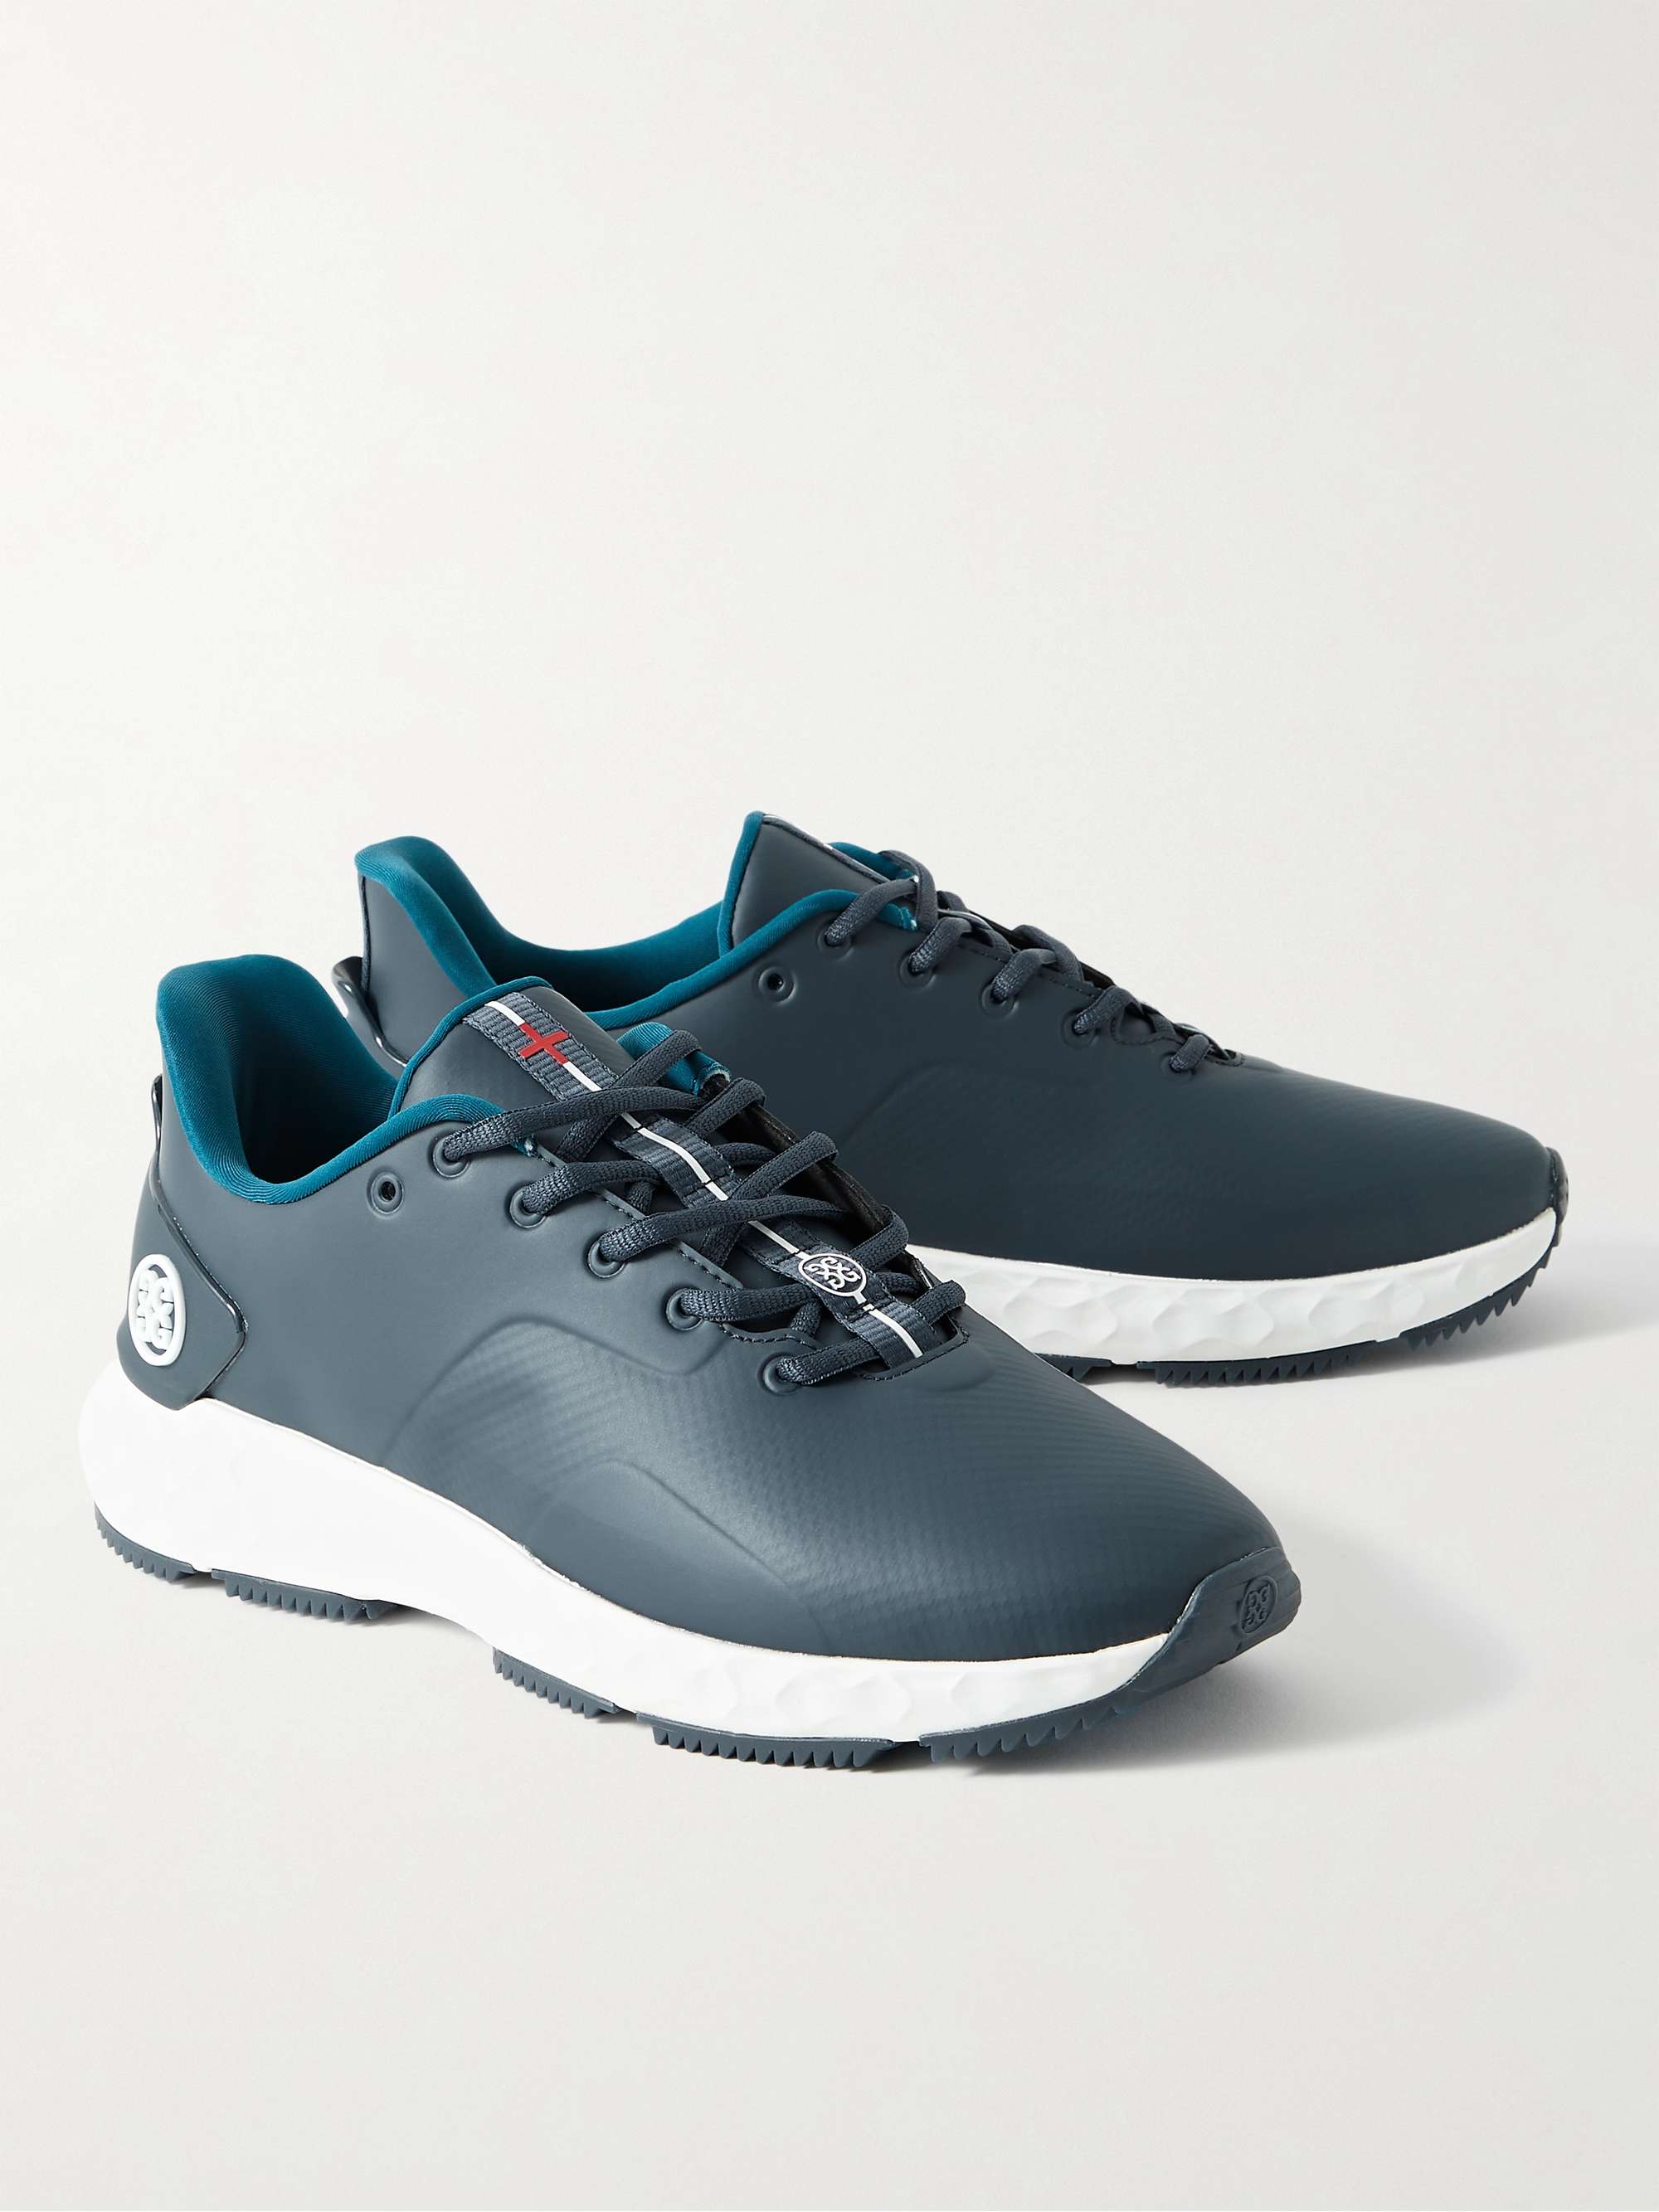 G/FORE MG4+ Rubber-Trimmed Coated-Mesh Golf Shoes